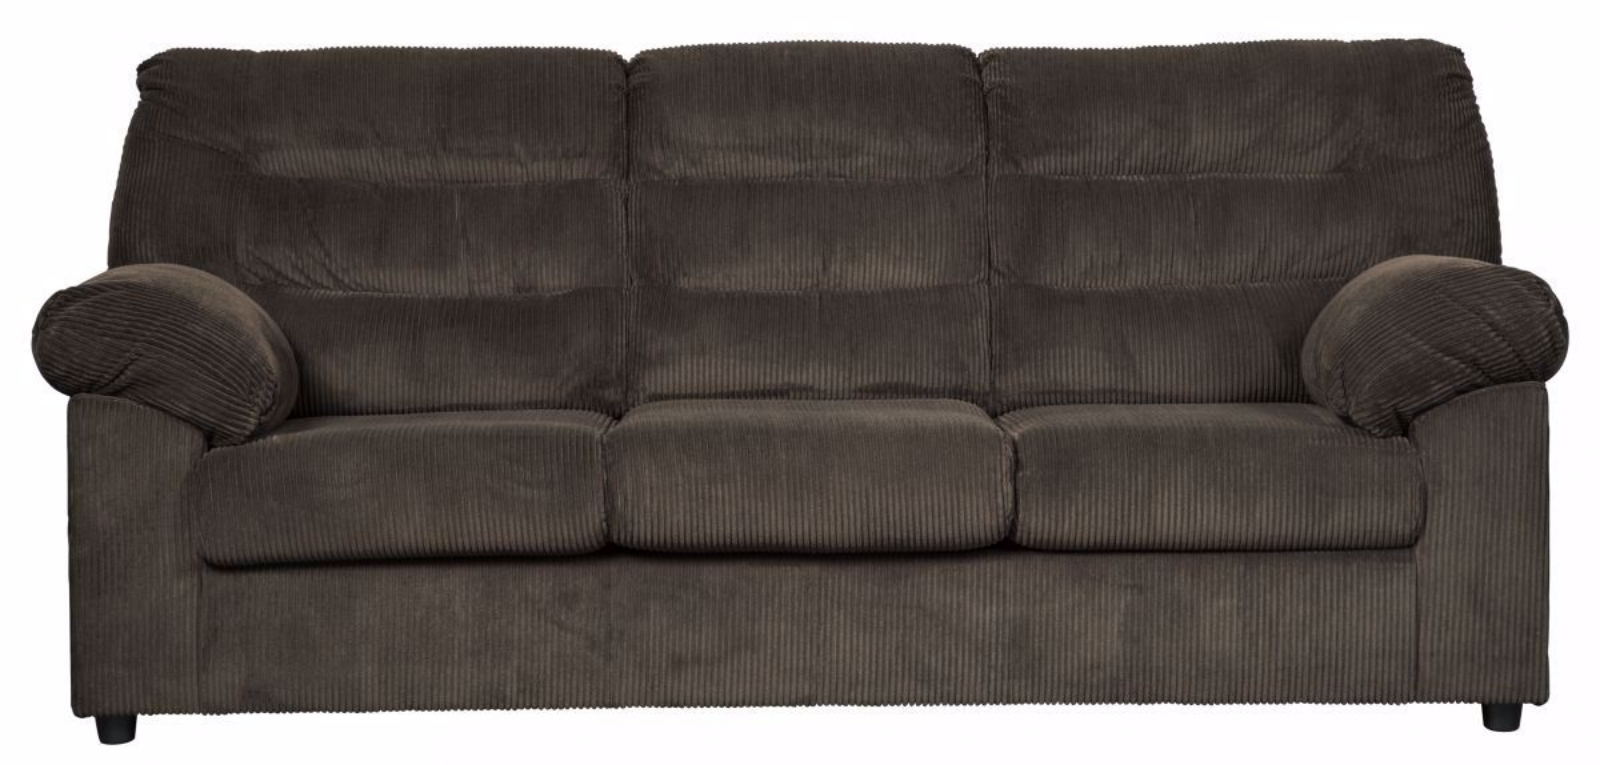 Picture of Gosnell Sofa